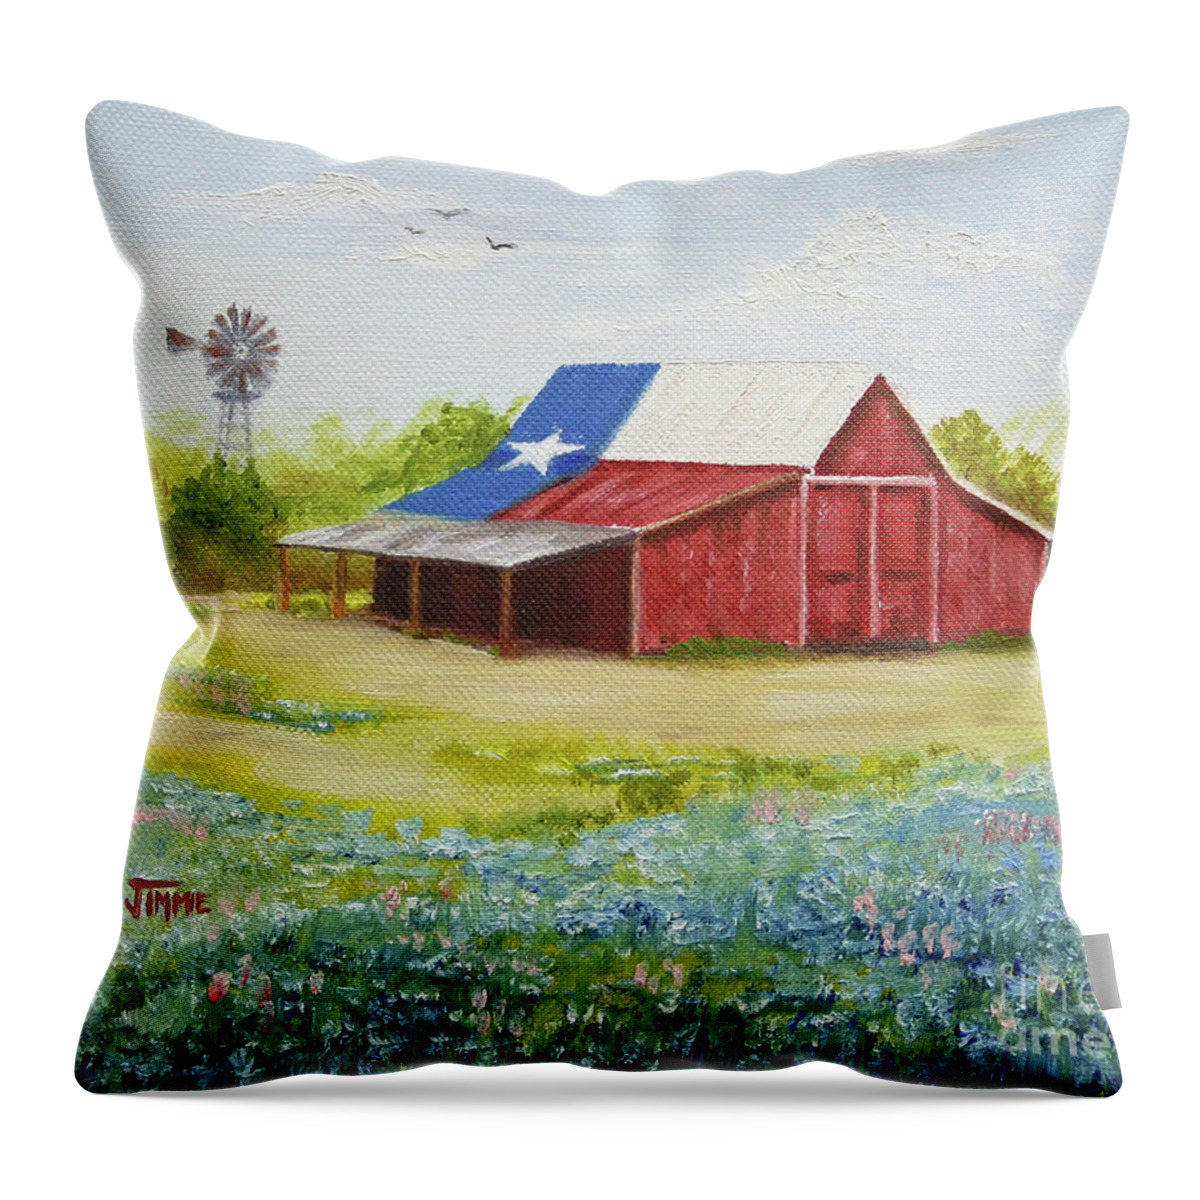 Bandera Barn Throw Pillow featuring the painting Texas Hill Country Barn by Jimmie Bartlett